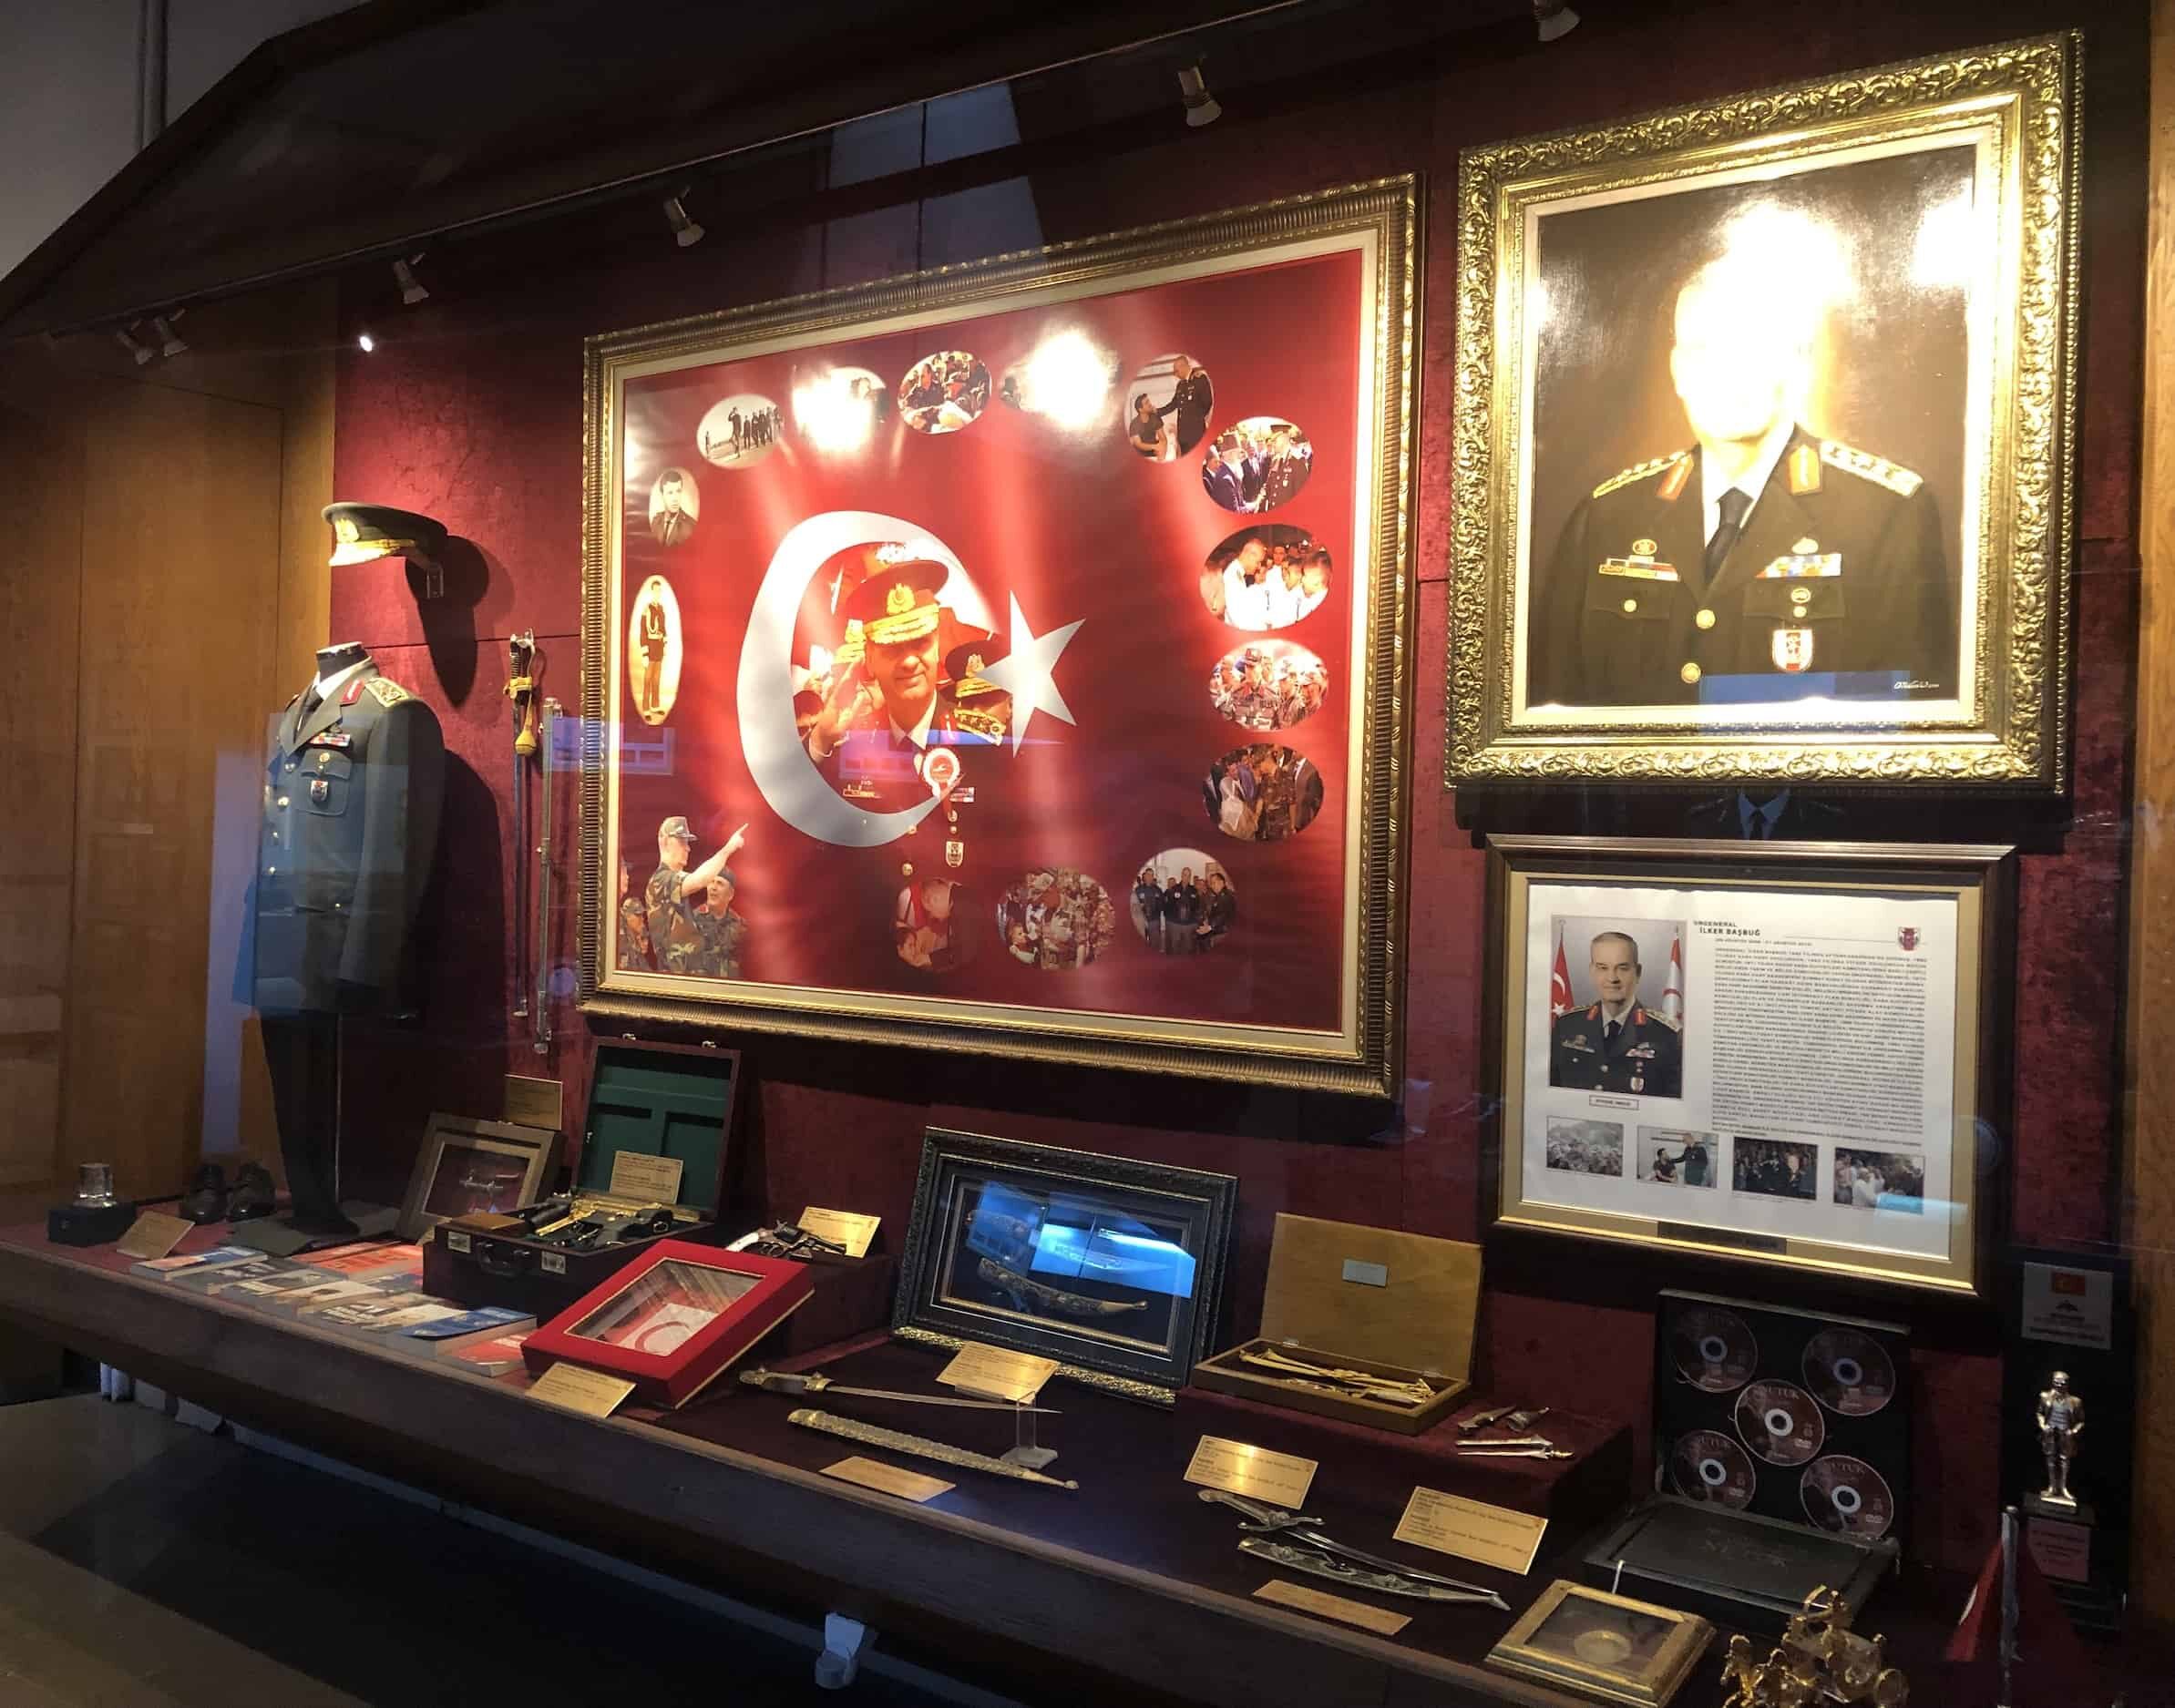 İlker Başbuğ exhibit in the Chiefs of General Staff Hall at the Harbiye Military Museum in Istanbul, Turkey